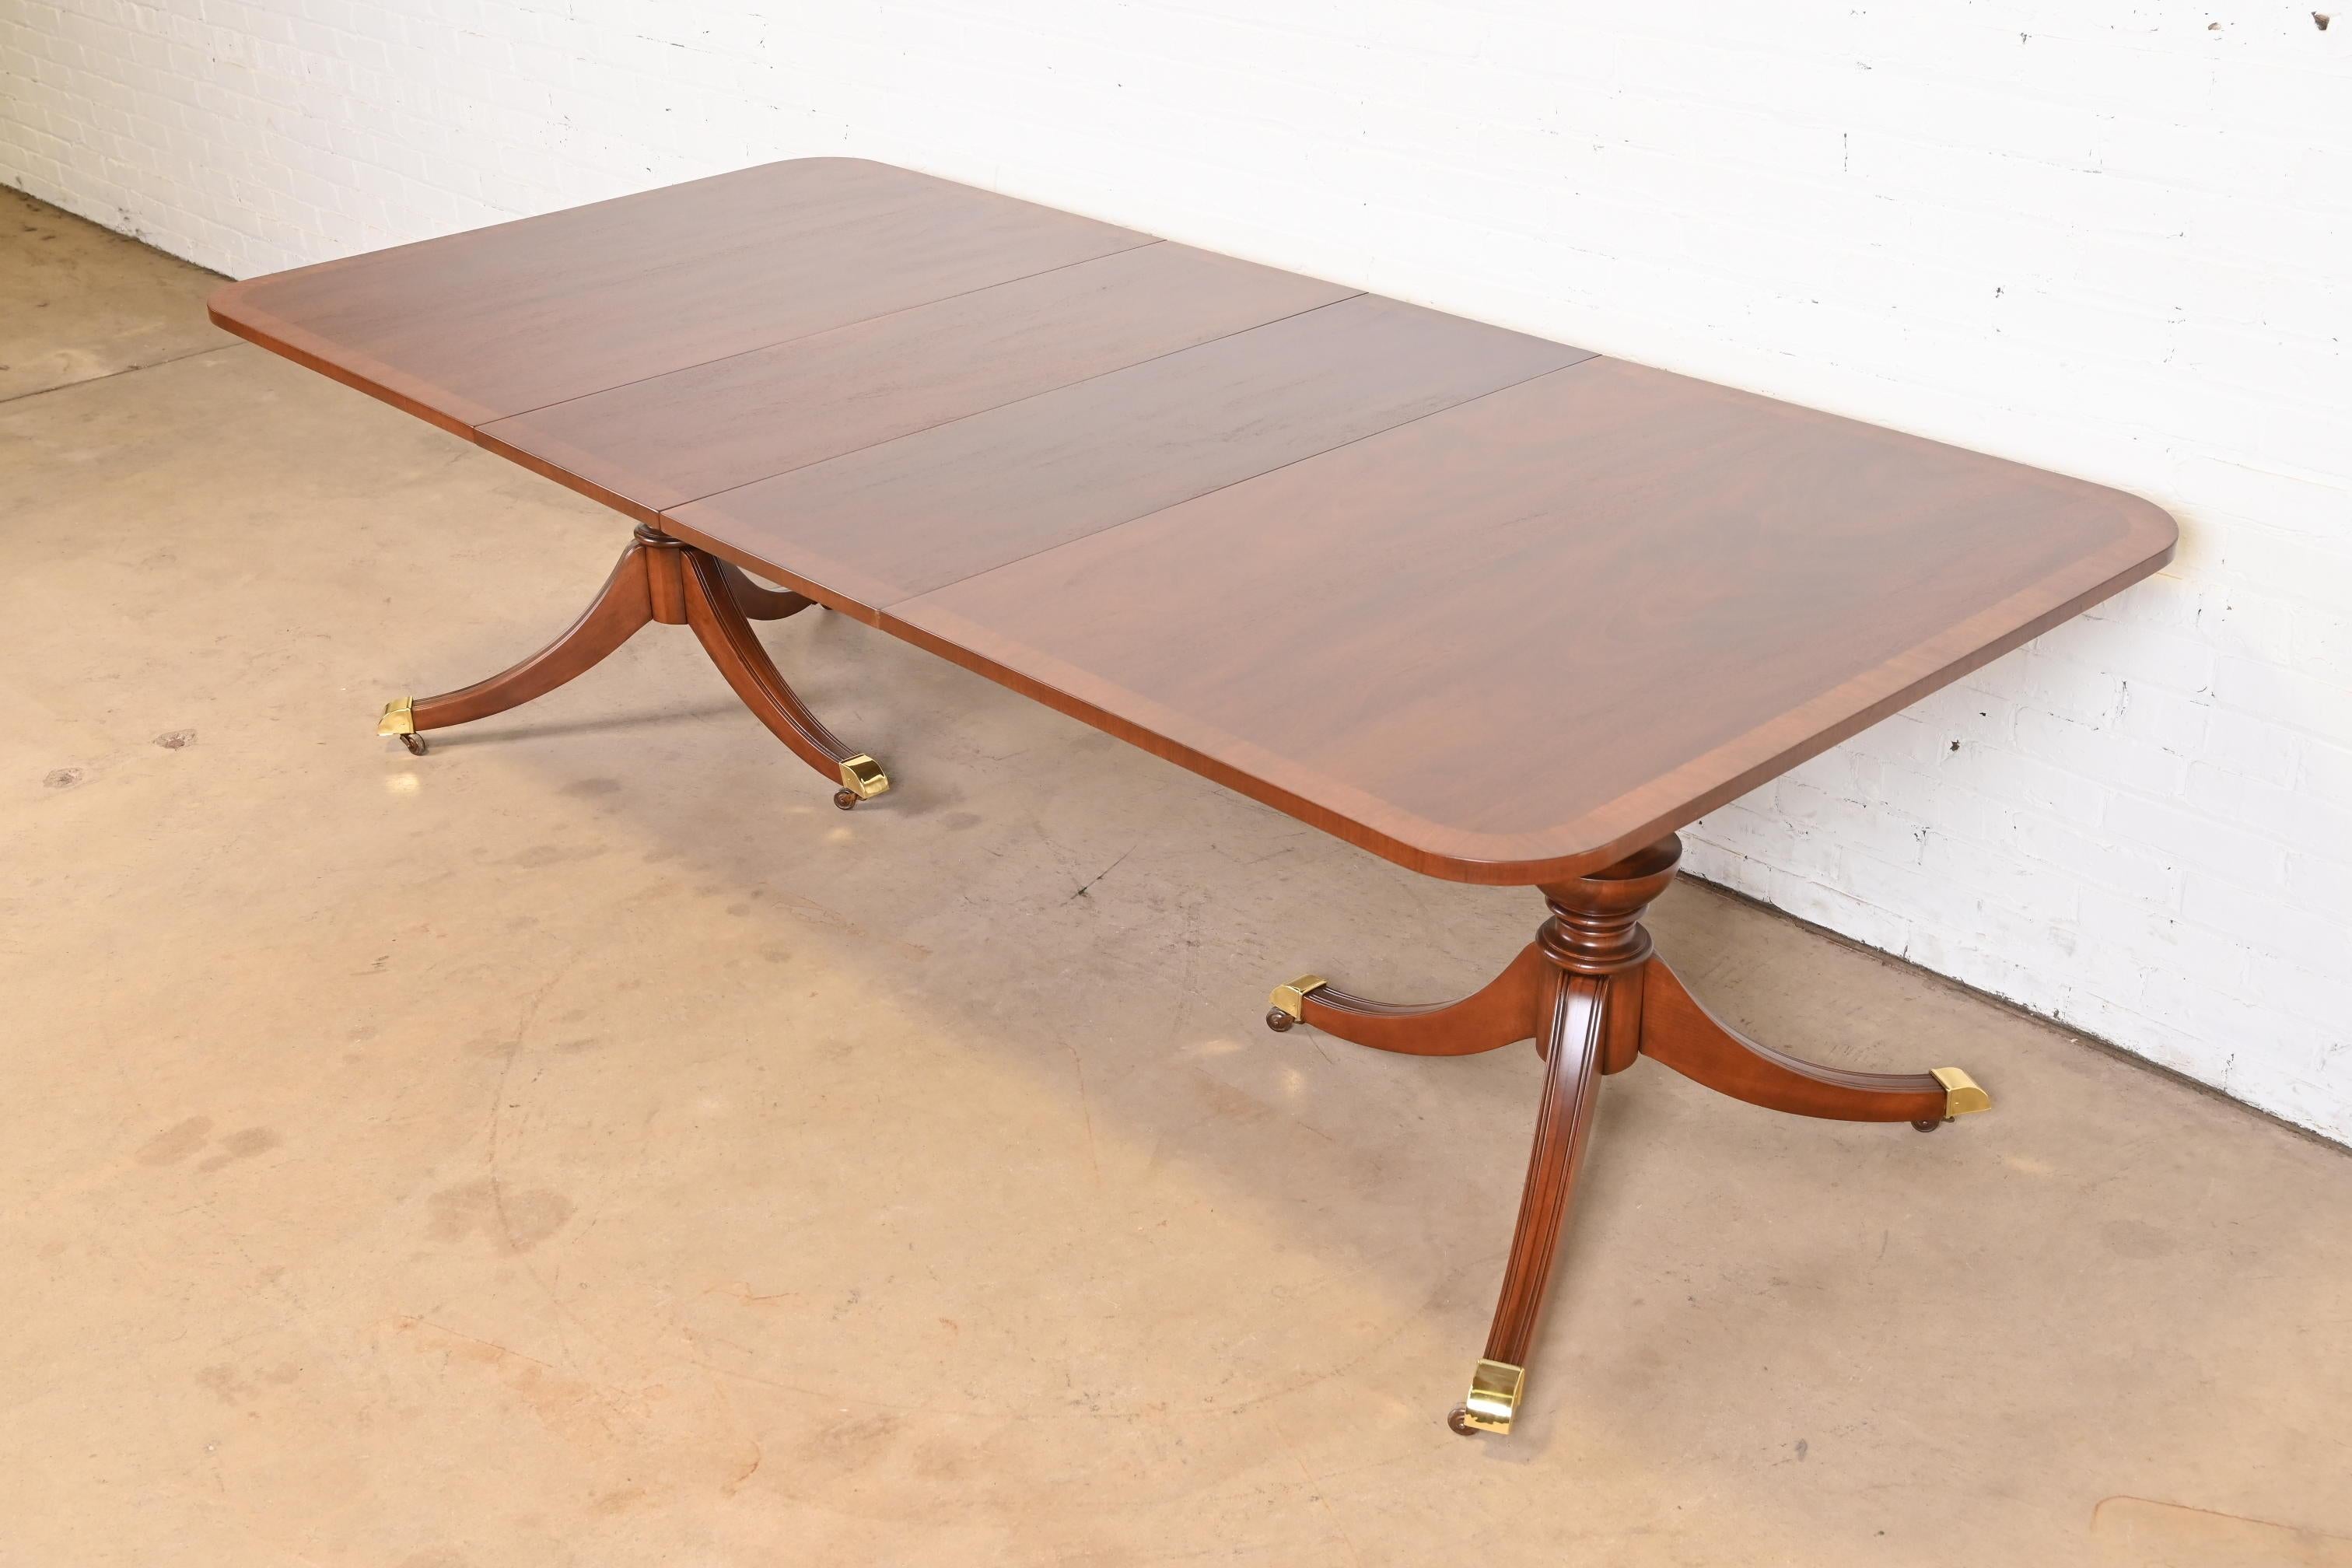 A gorgeous Georgian or Regency style double pedestal extension dining table

In the manner of Baker Furniture

USA, Late 20th Century

Beautiful book-matched banded mahogany, with carved solid mahogany pedestals, and brass-capped feet on brass